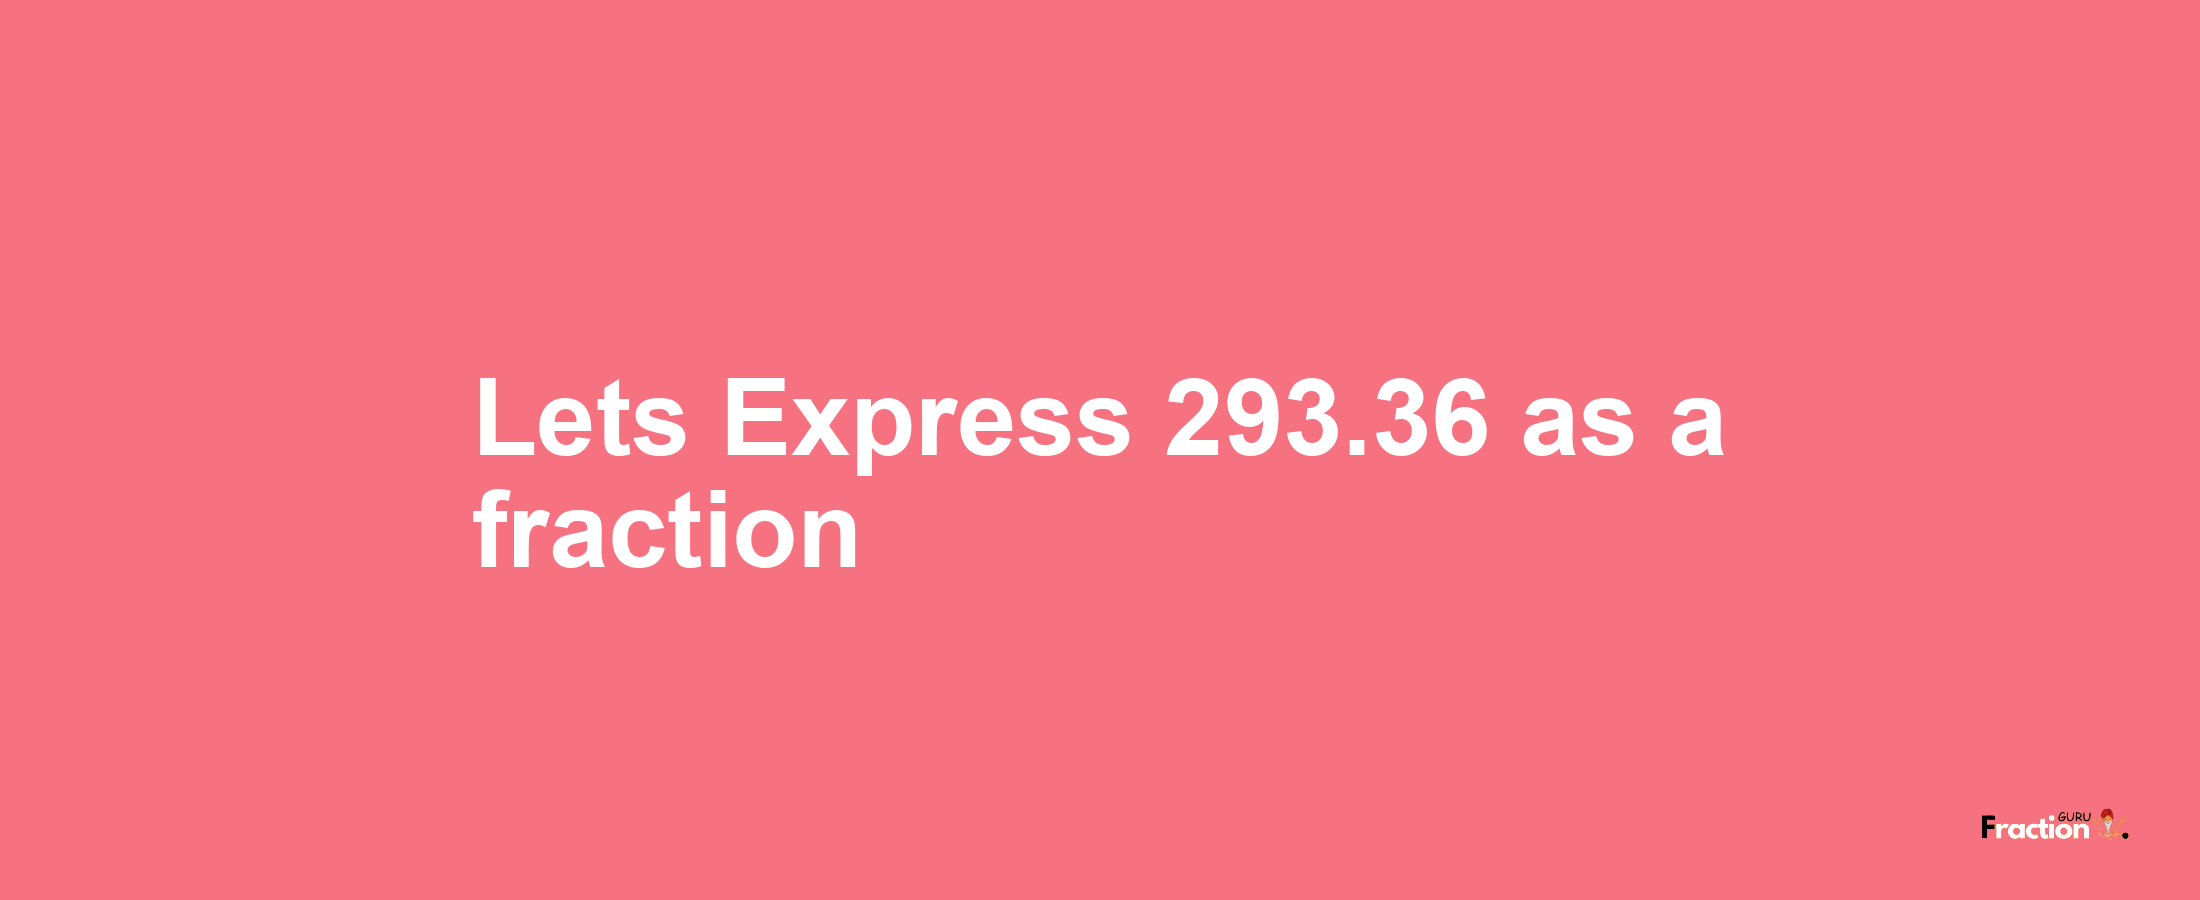 Lets Express 293.36 as afraction